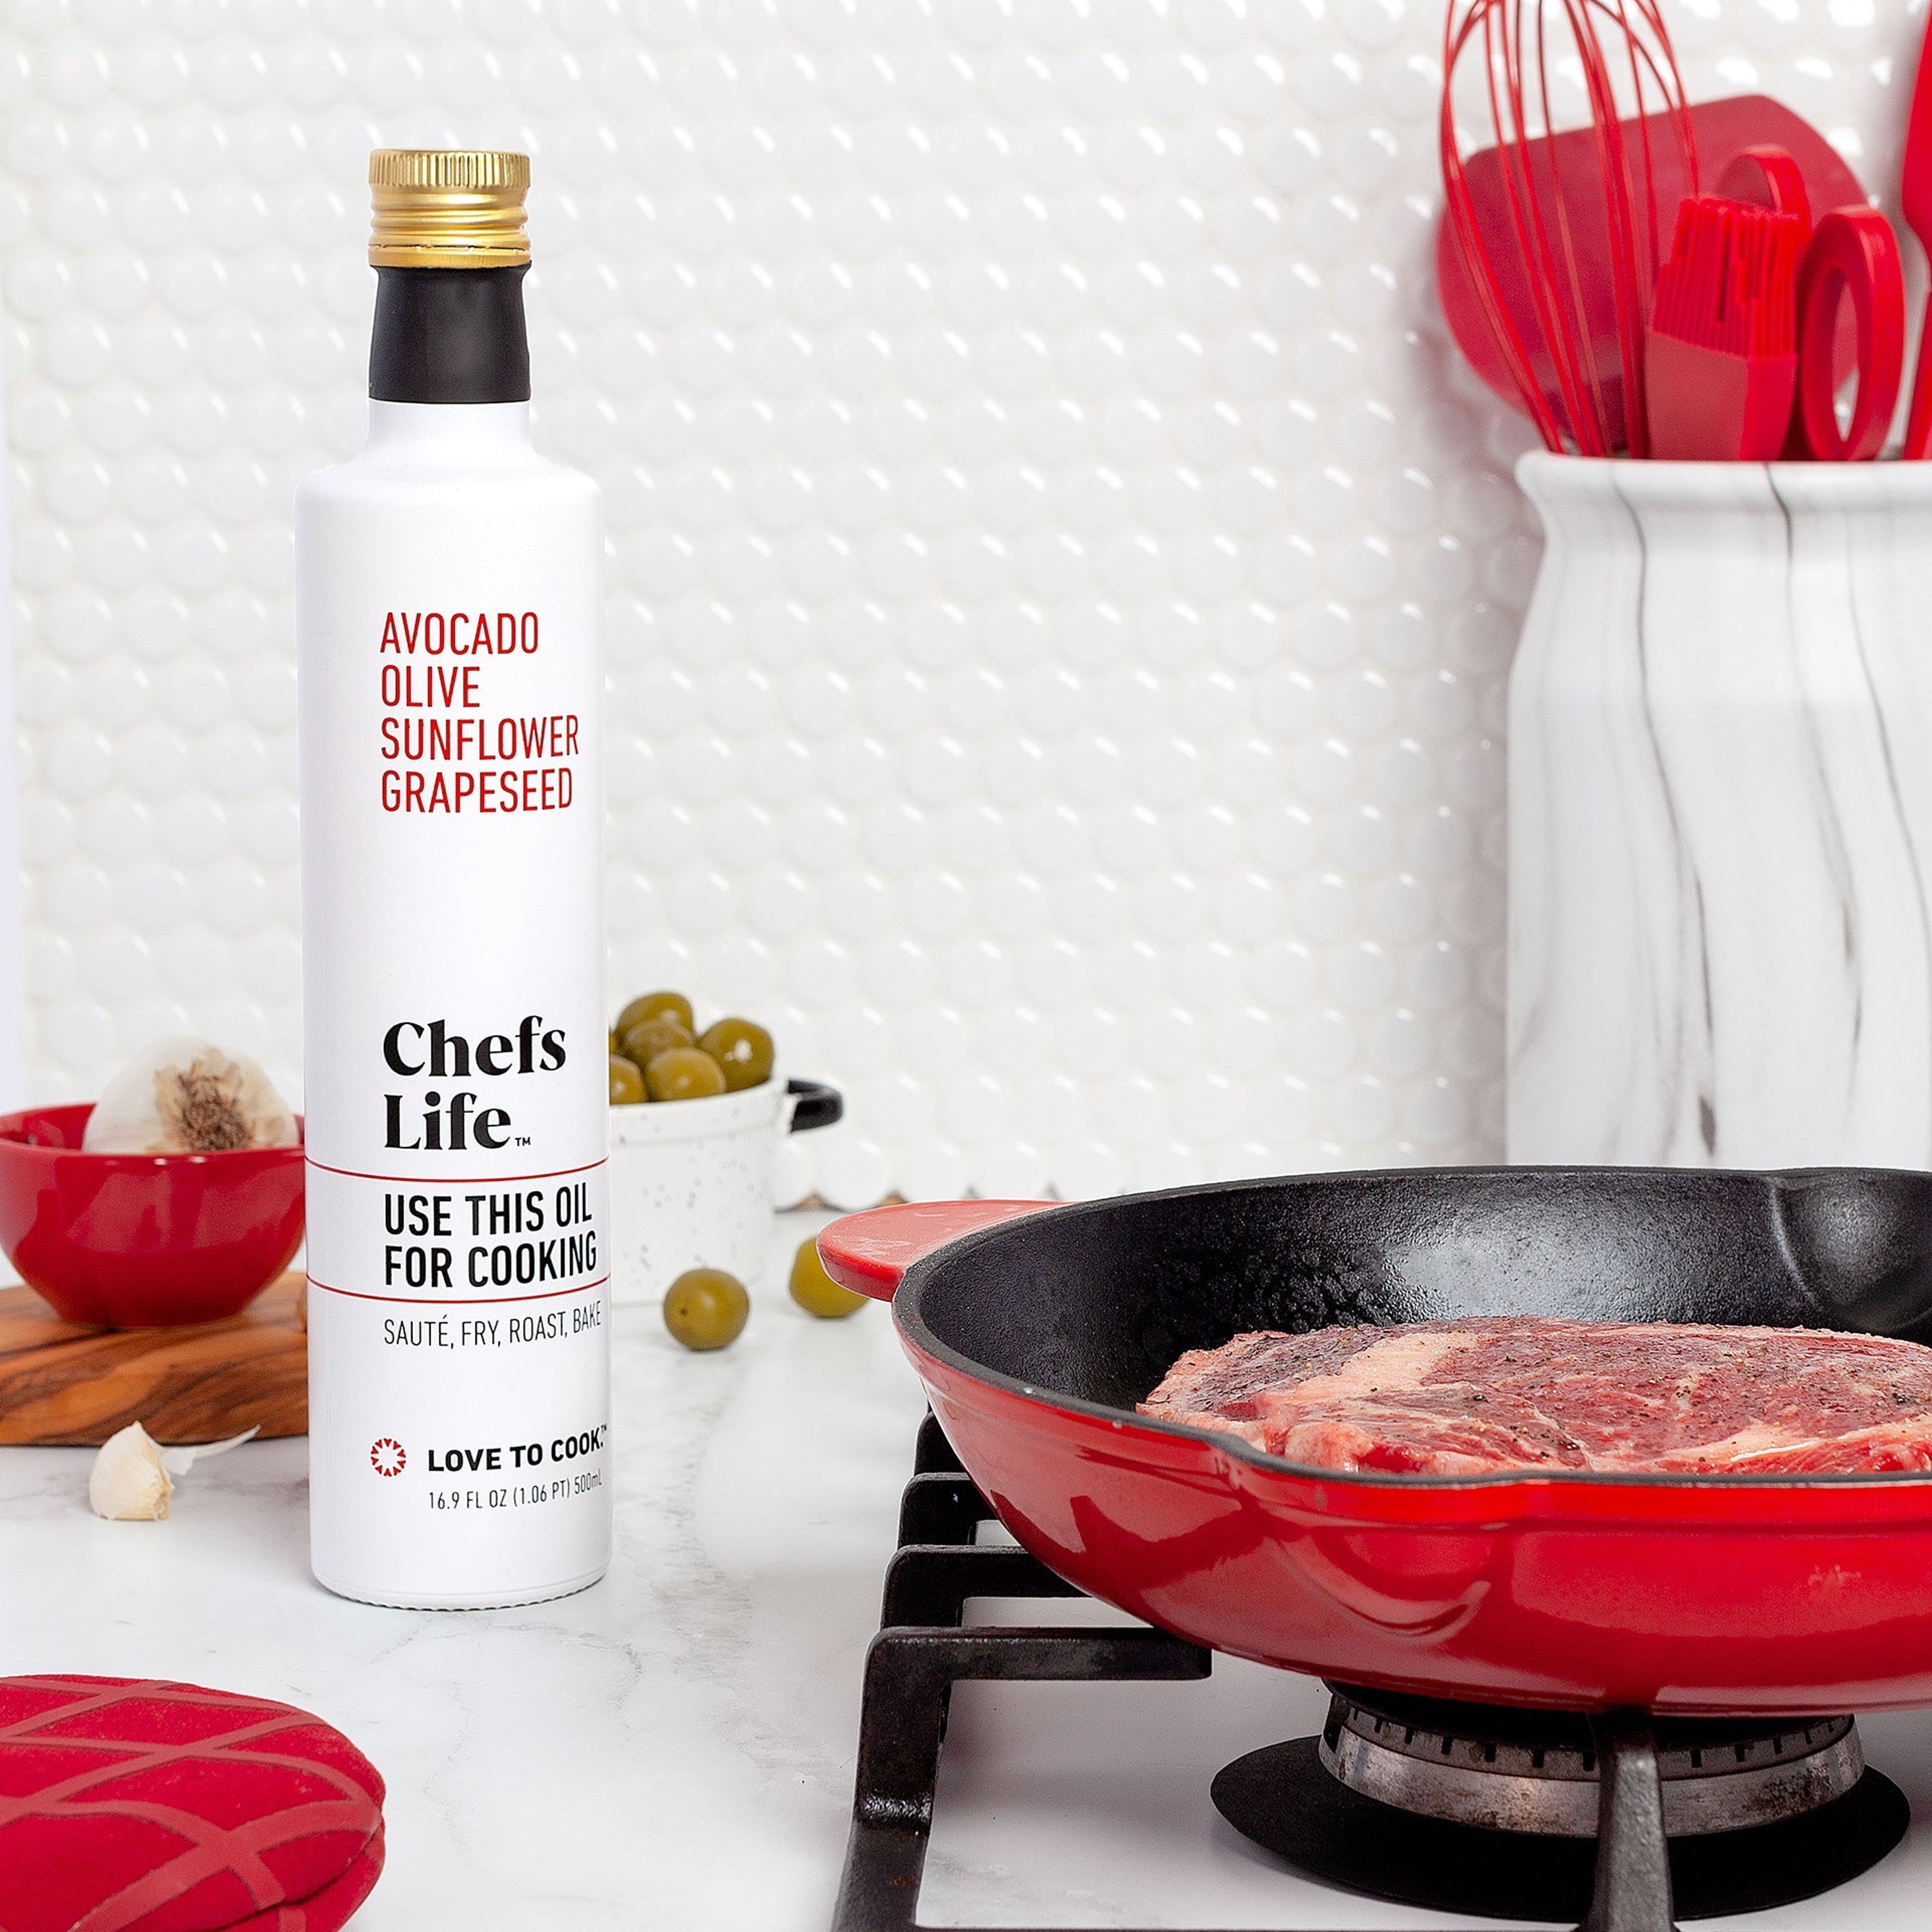 Chefs Life Cooking Oil (500mL) - $13.99